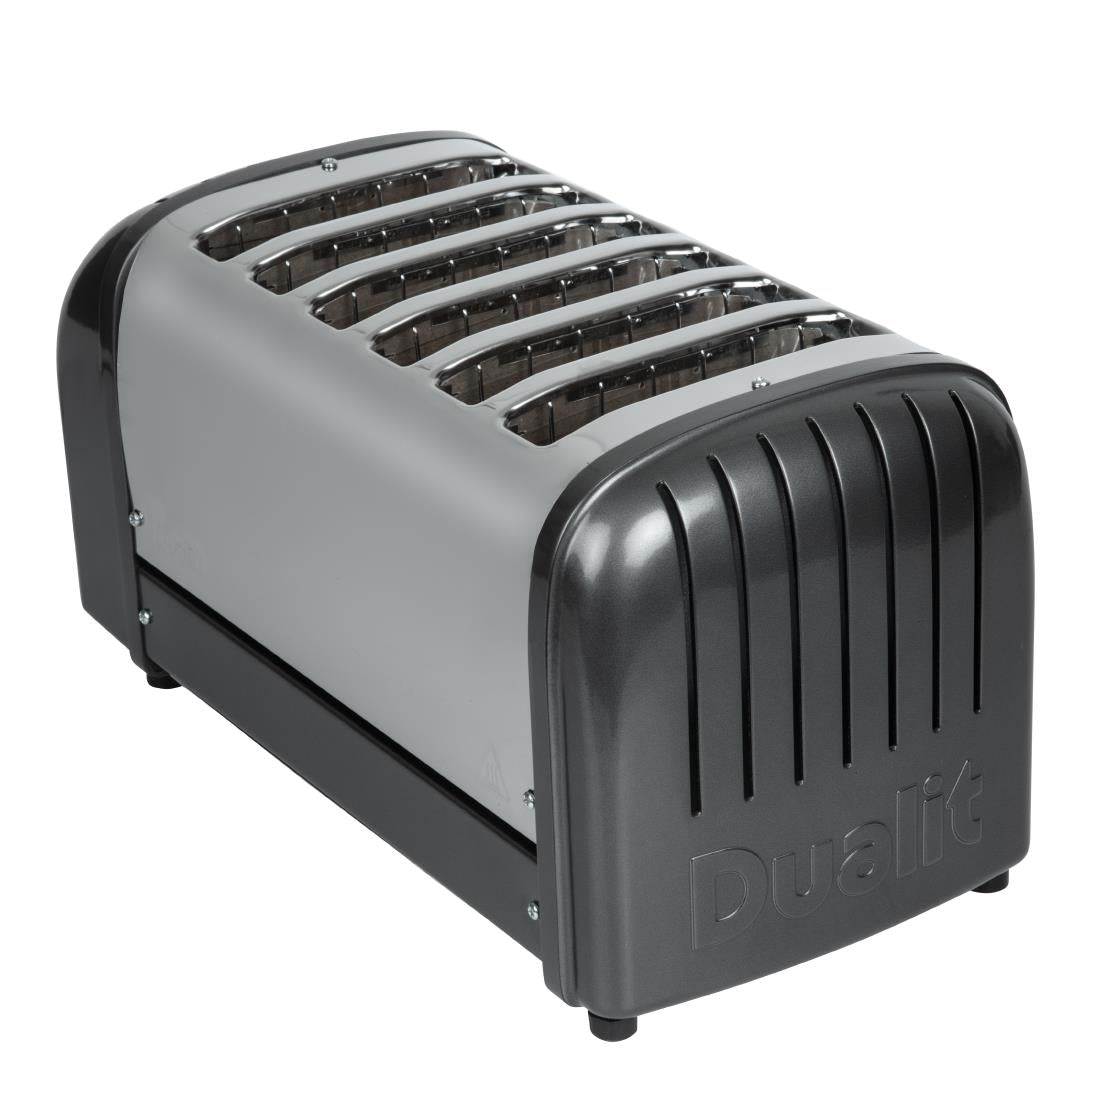 Dualit 6 Slice Vario Toaster Charcoal 60156 JD Catering Equipment Solutions Ltd